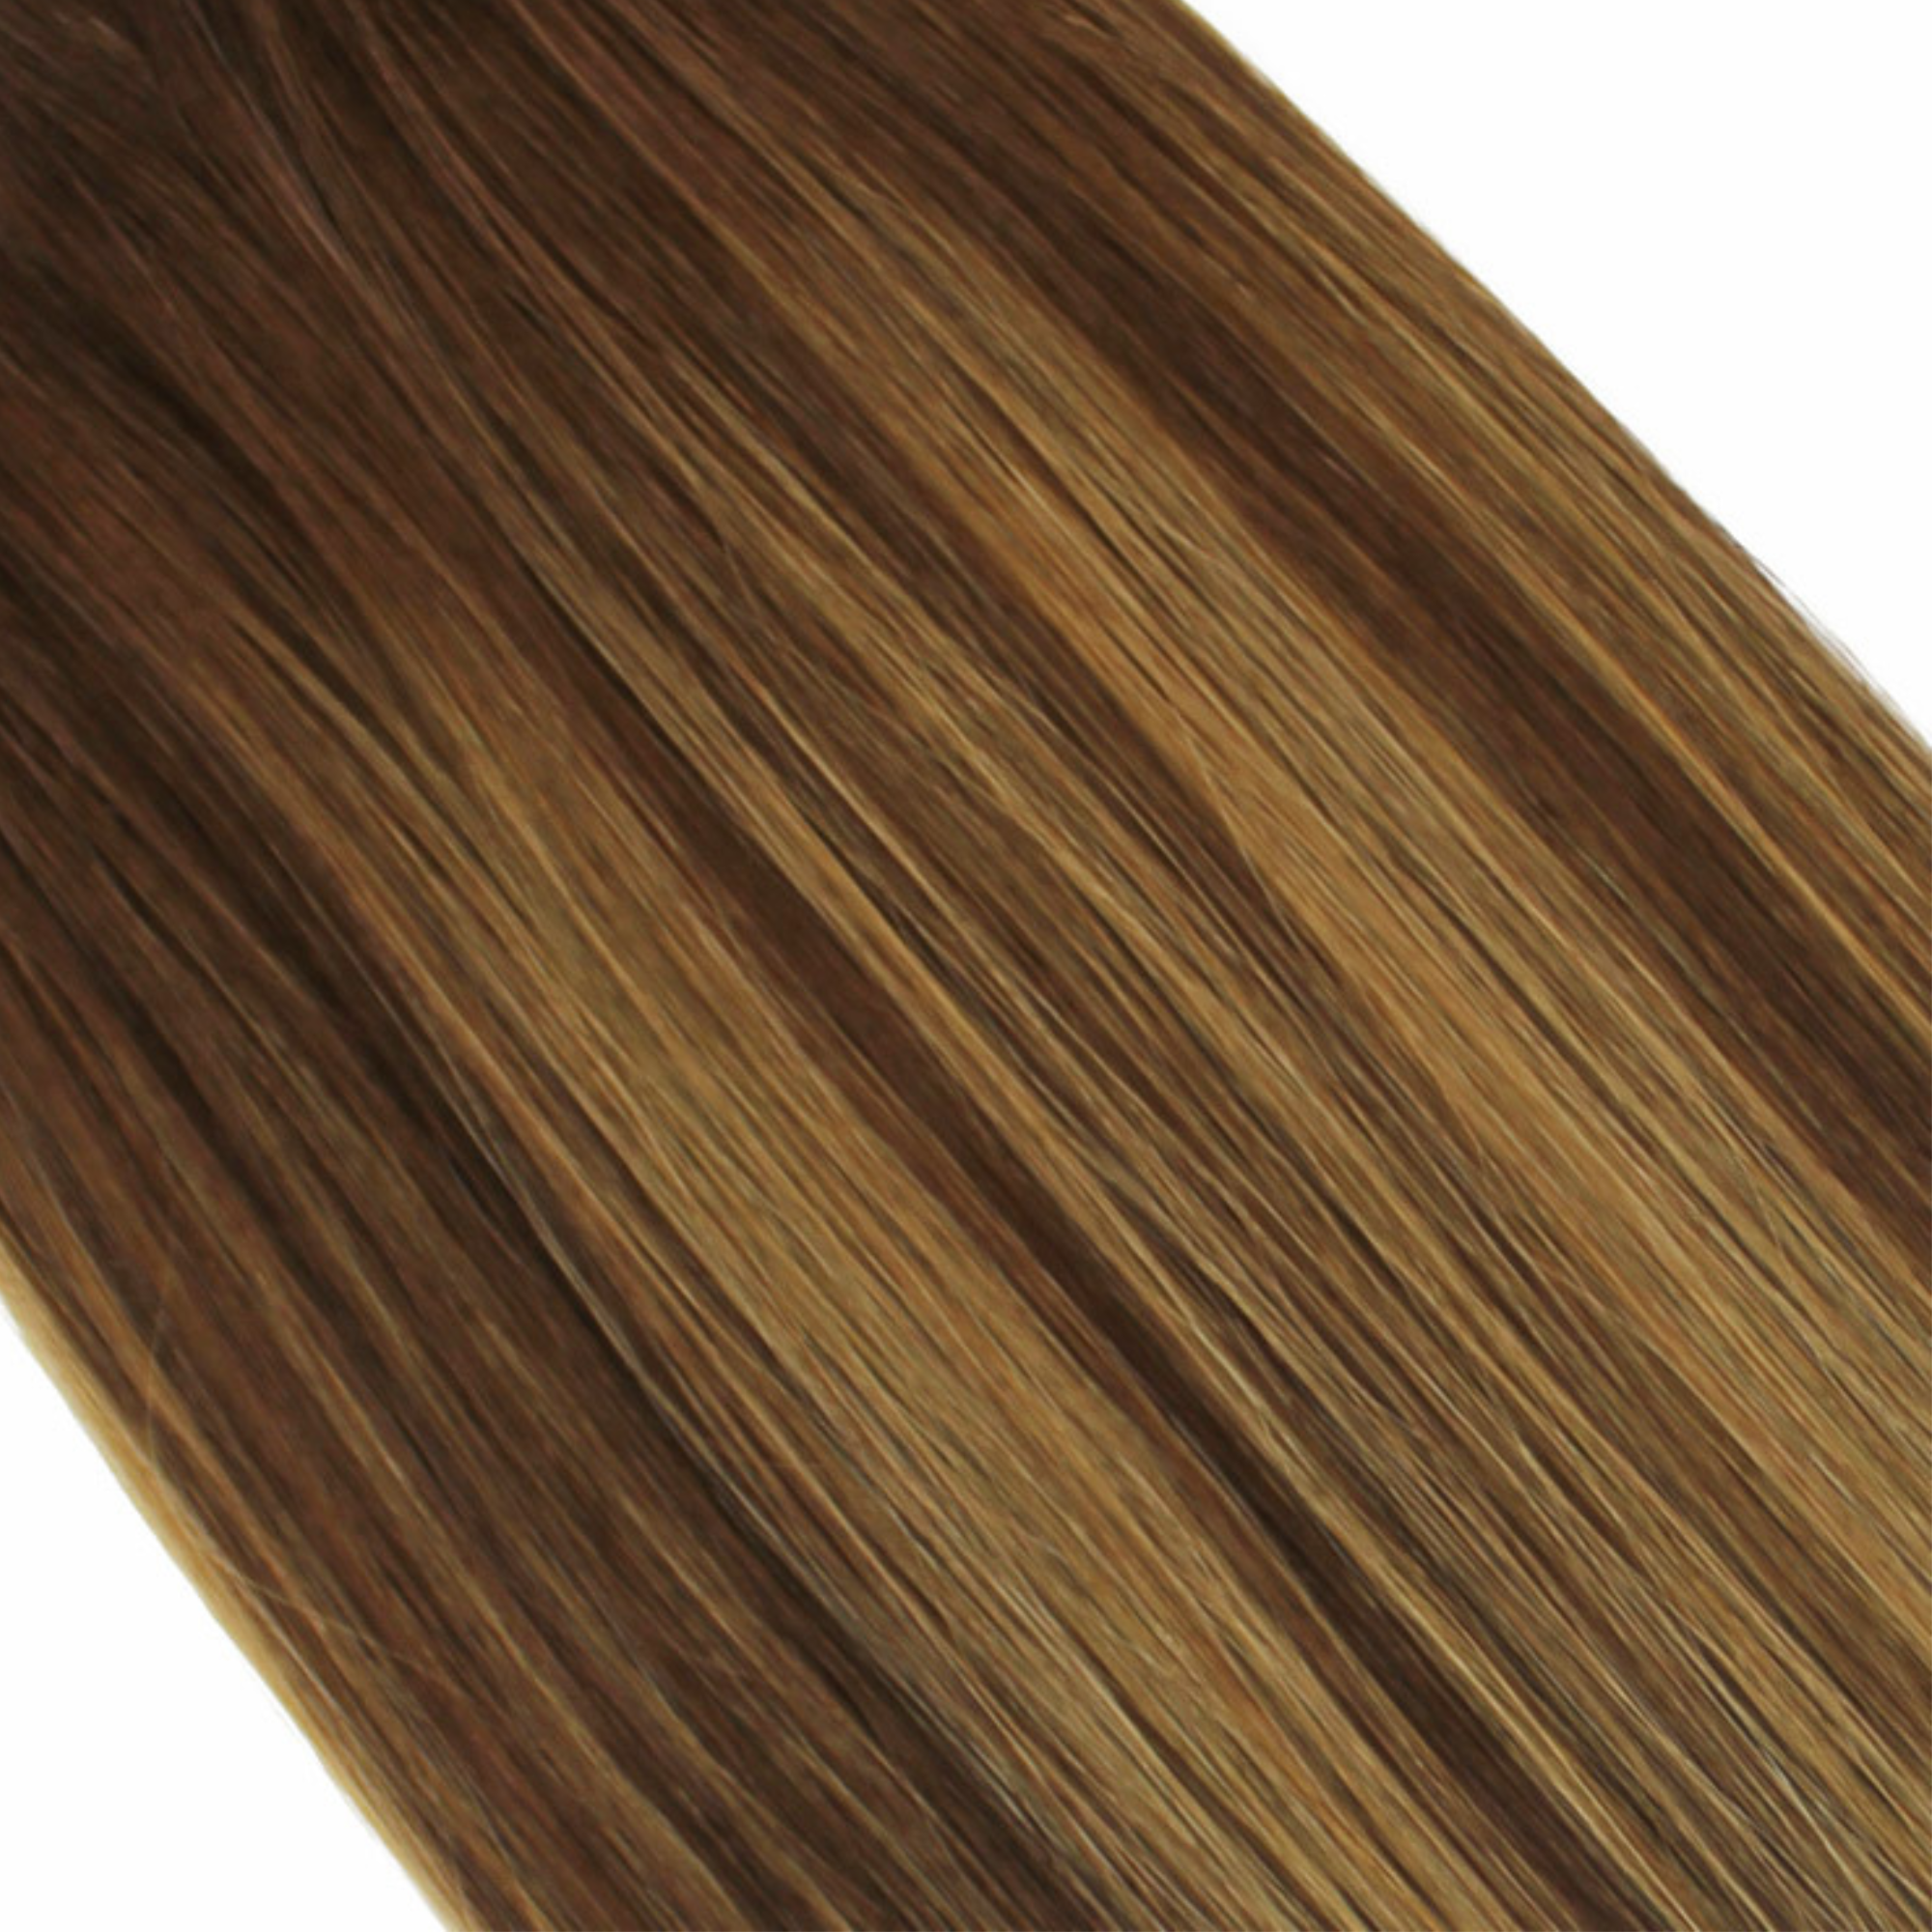 "hair rehab london 18" weft hair extensions shade swatch titled rooted bronze"